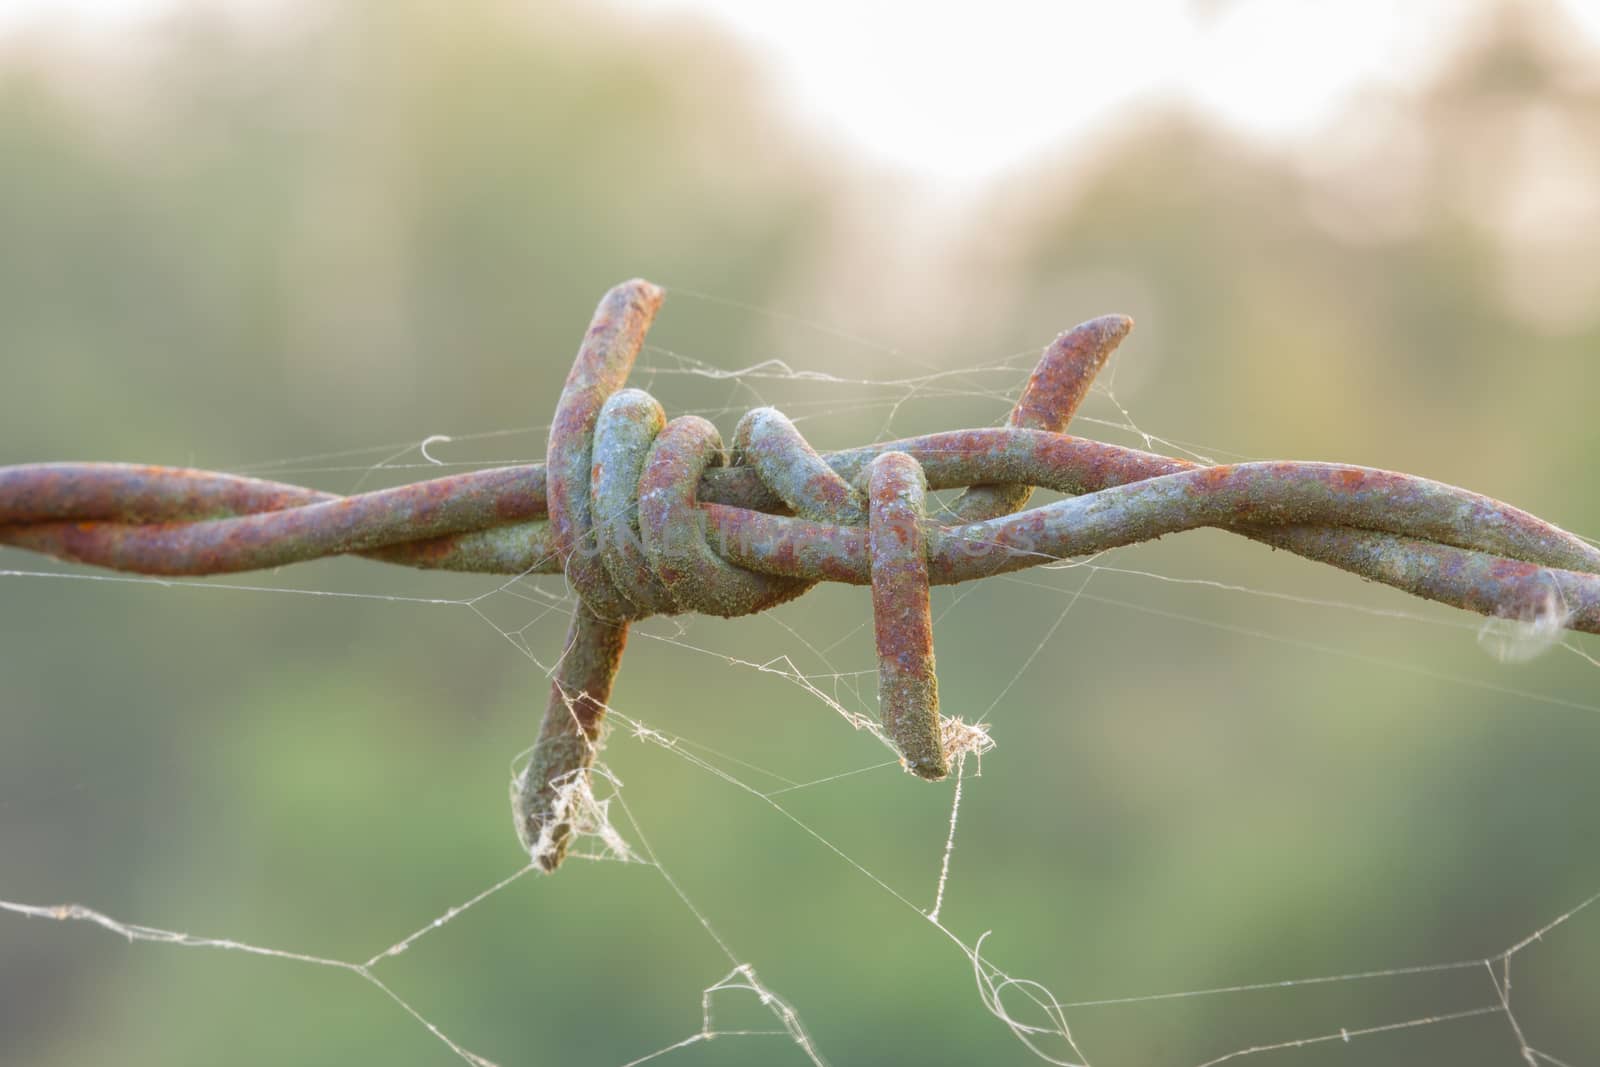 rusty barbed wire with spiderweb